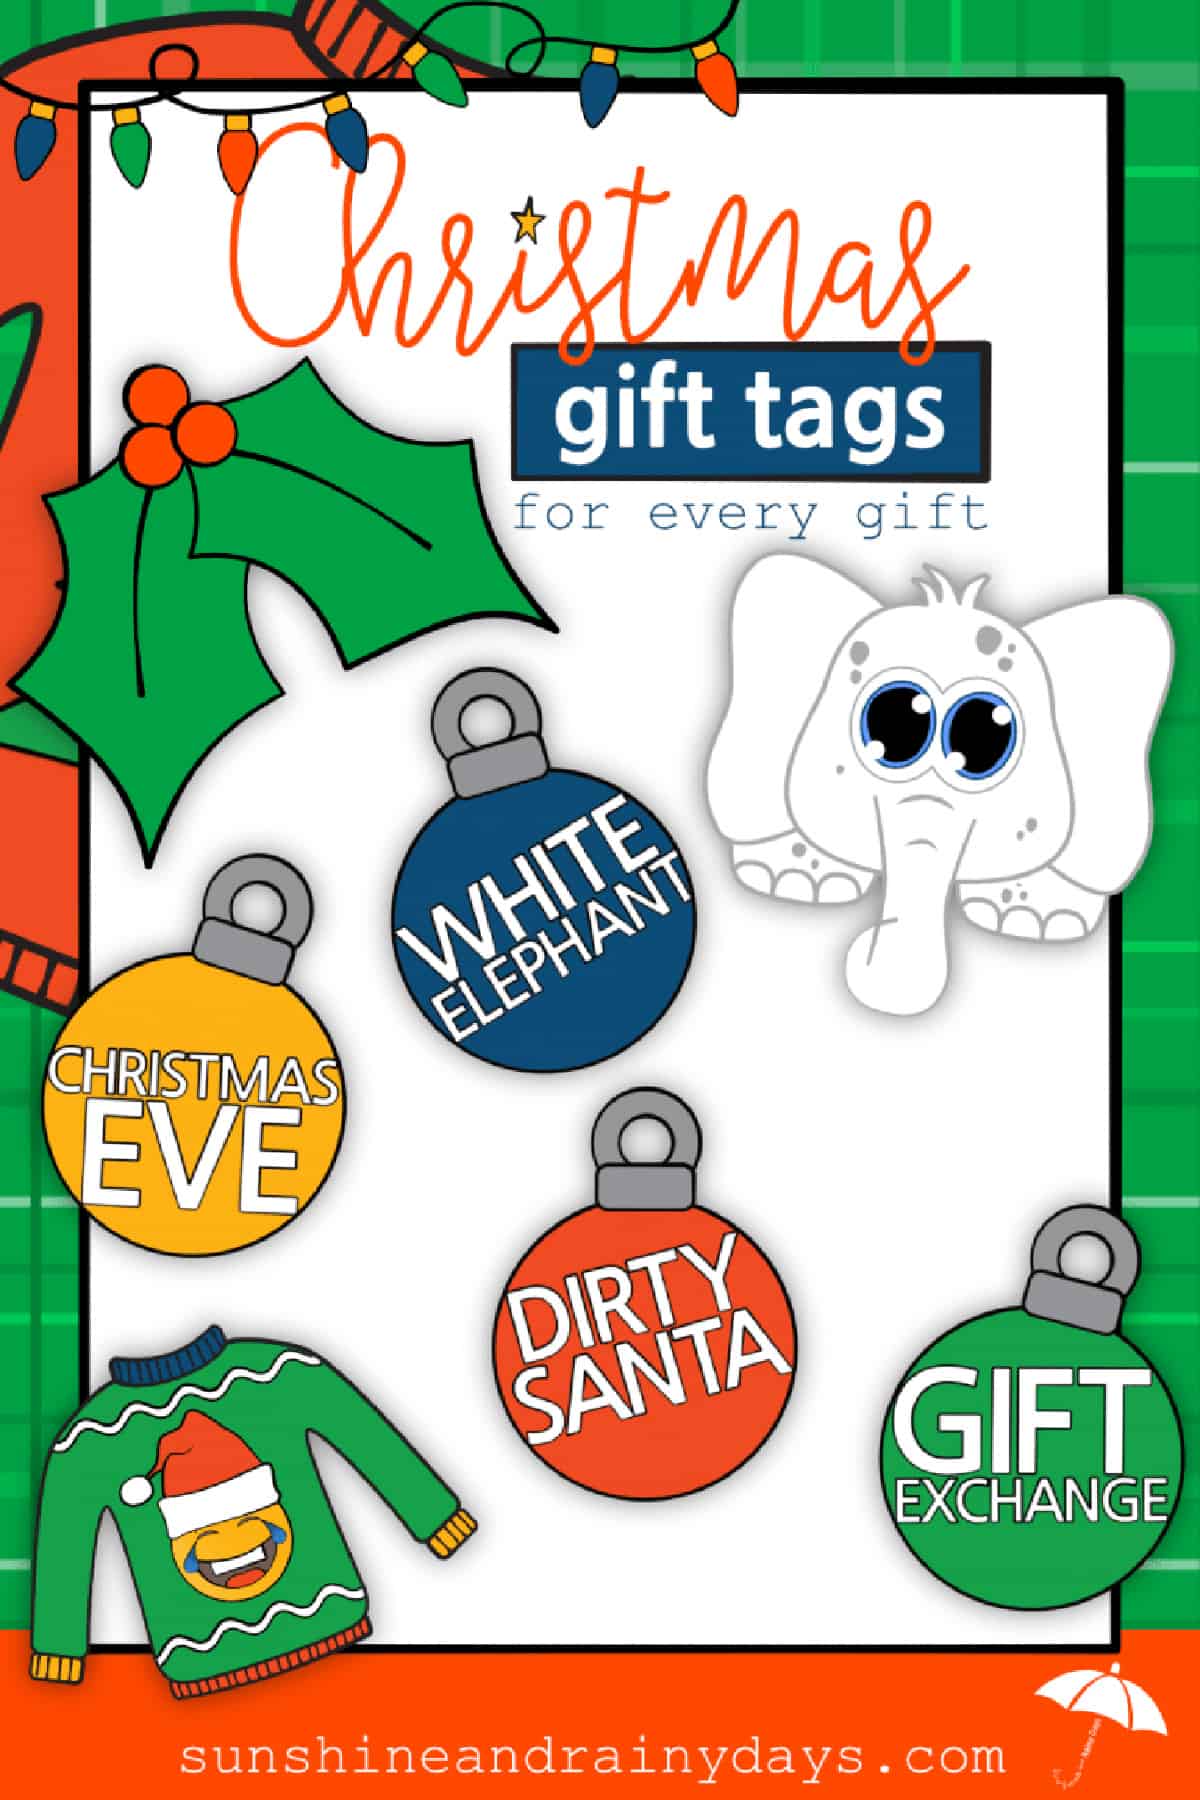 Colorful illustrated Christmas gift tags for every type of gifting occasion.